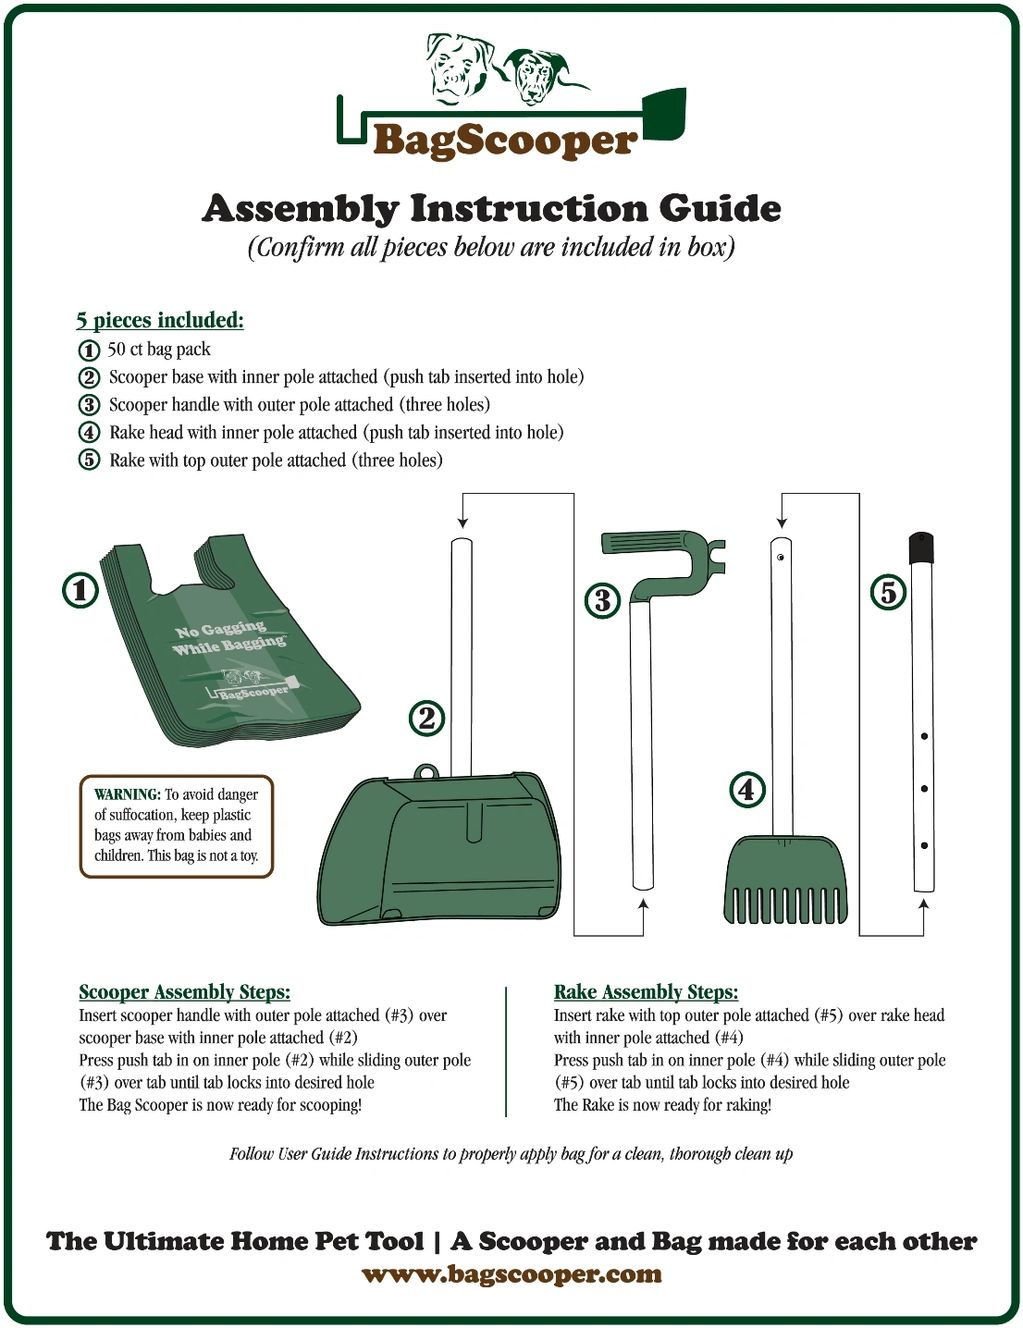 Easy Instructions Guide on how to assemble the Bag Scooper pooper scooper out of the box.